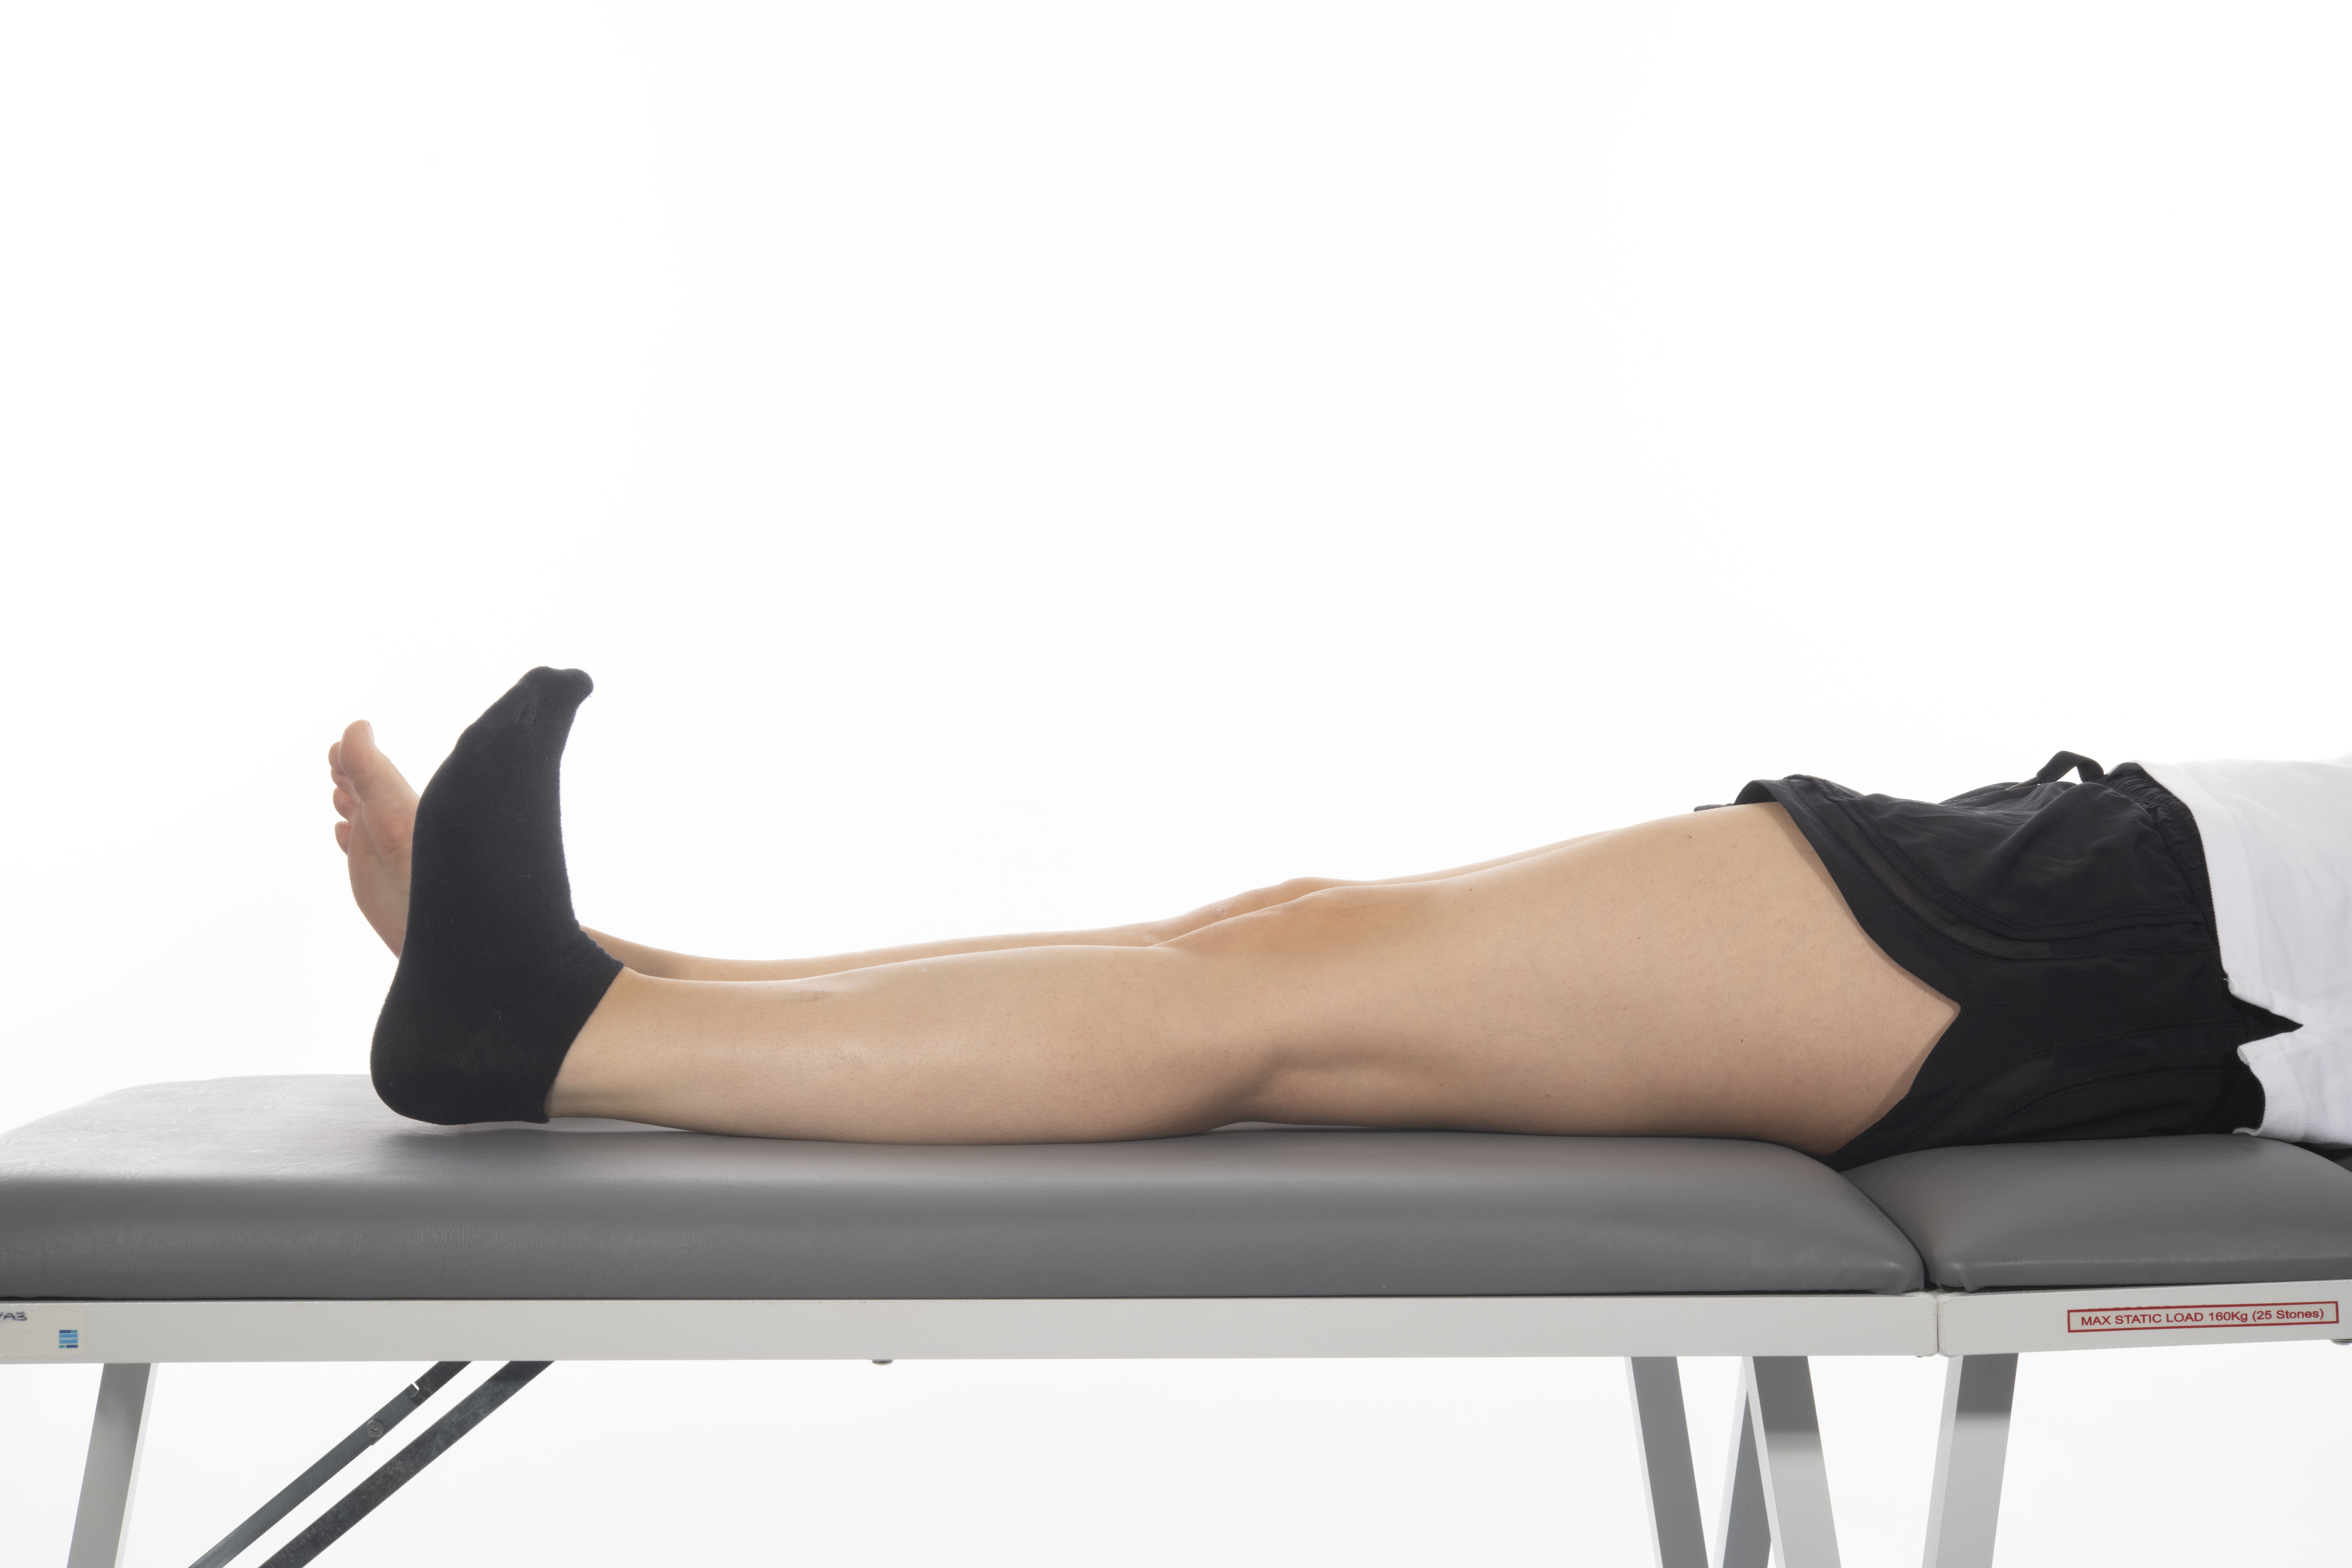 Static quadricep exercise; press back of your knee to the bed